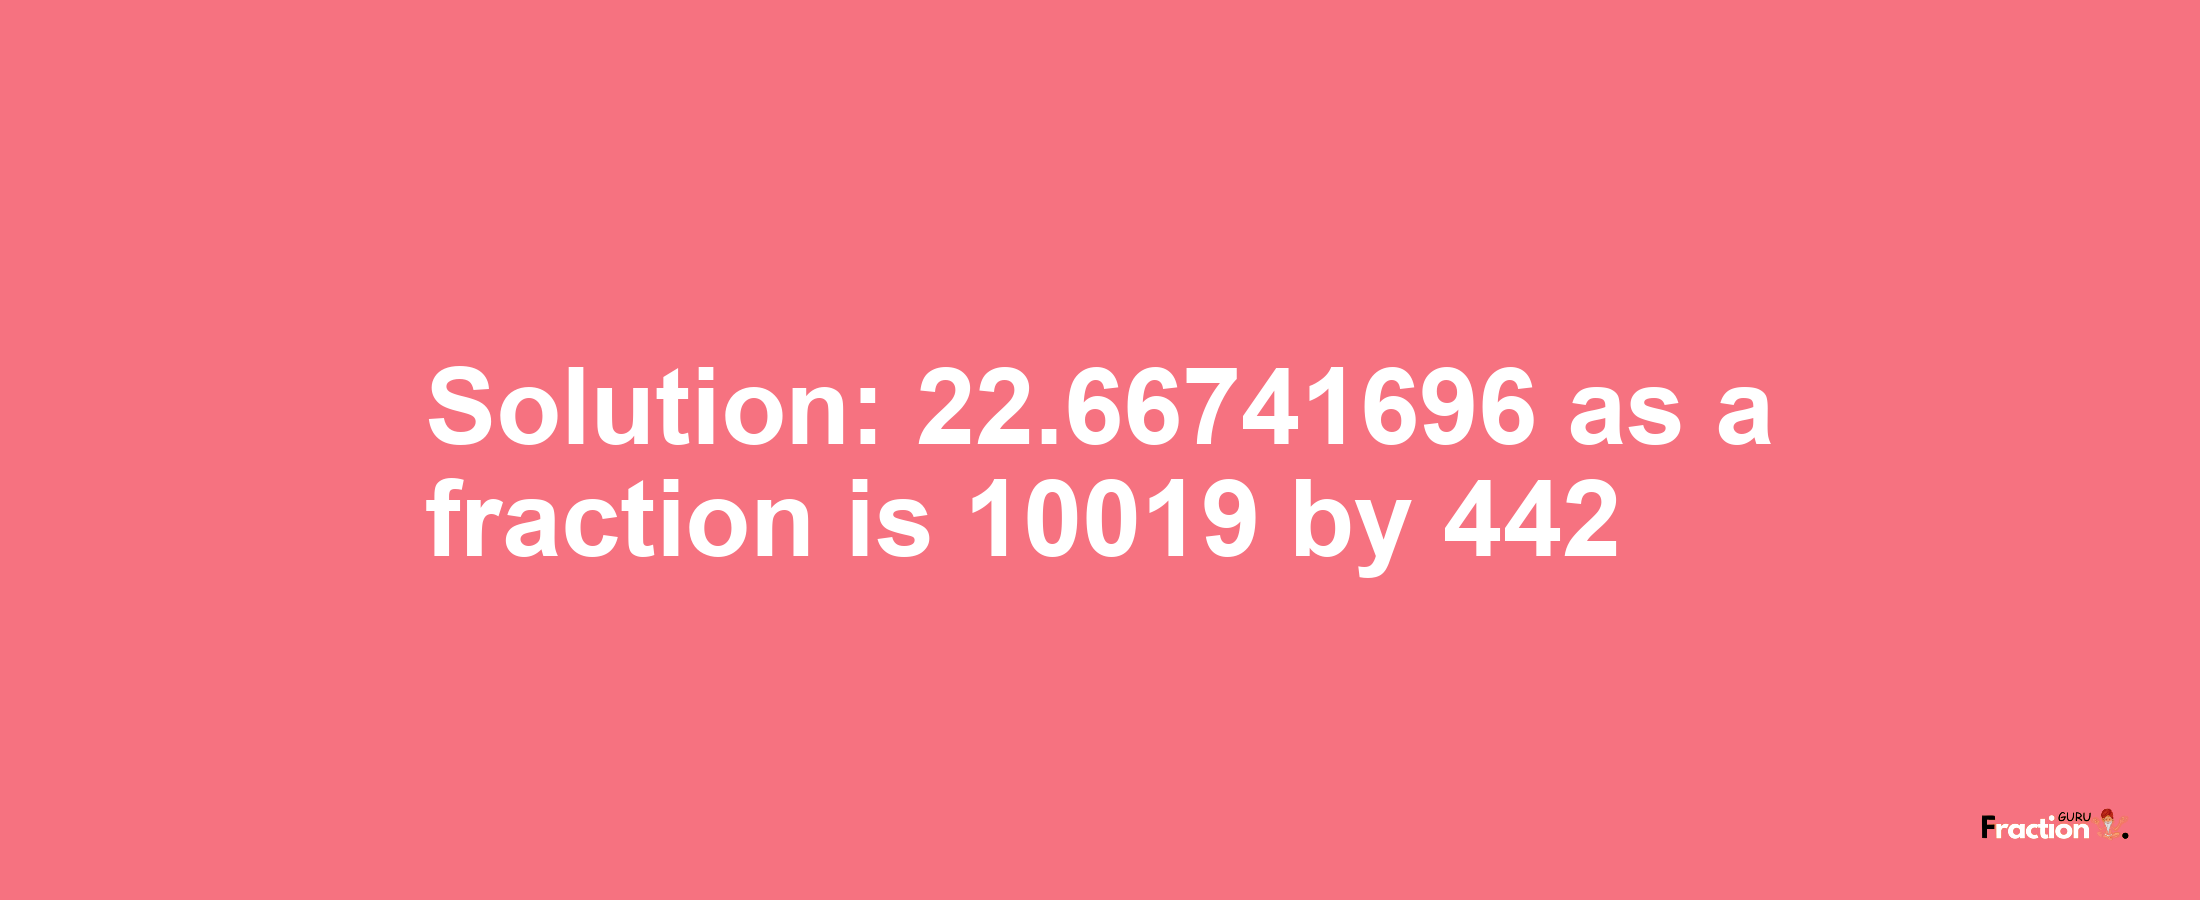 Solution:22.66741696 as a fraction is 10019/442